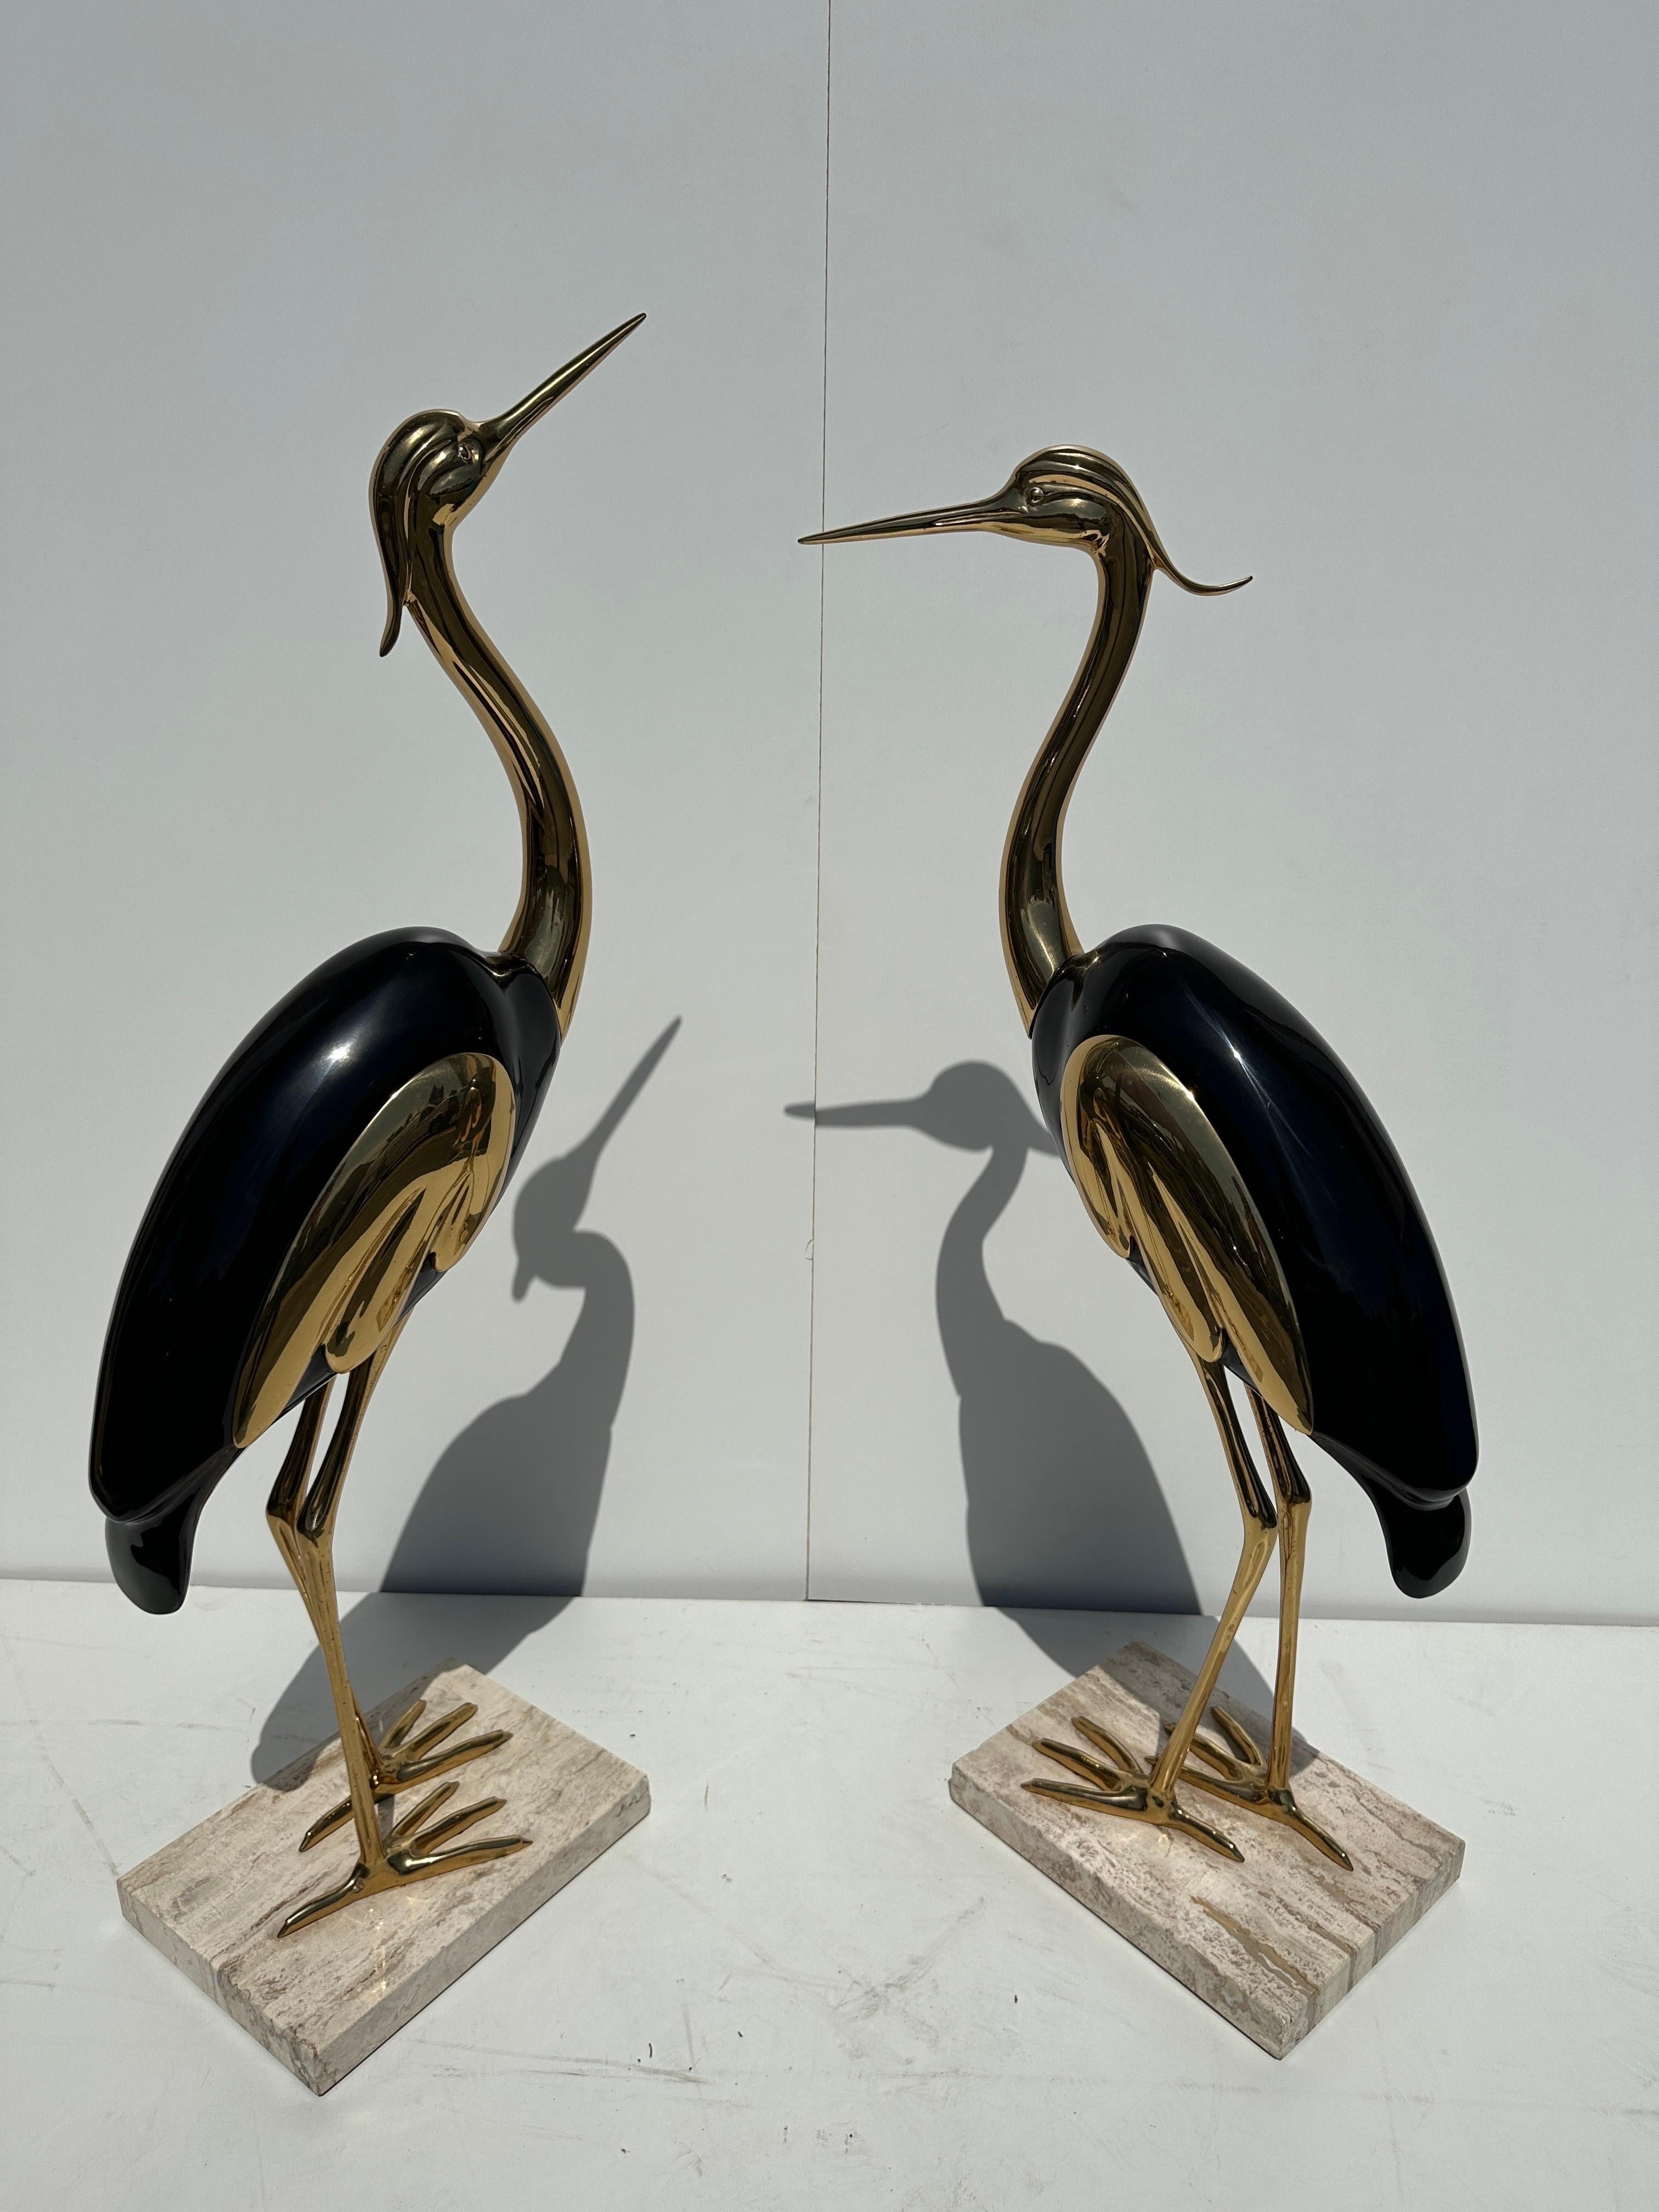 Pair of Italian brass and lacquered wood heron / crane sculptures attributed to Antonio Pavia. Travertine base has some small chipping in the corner.